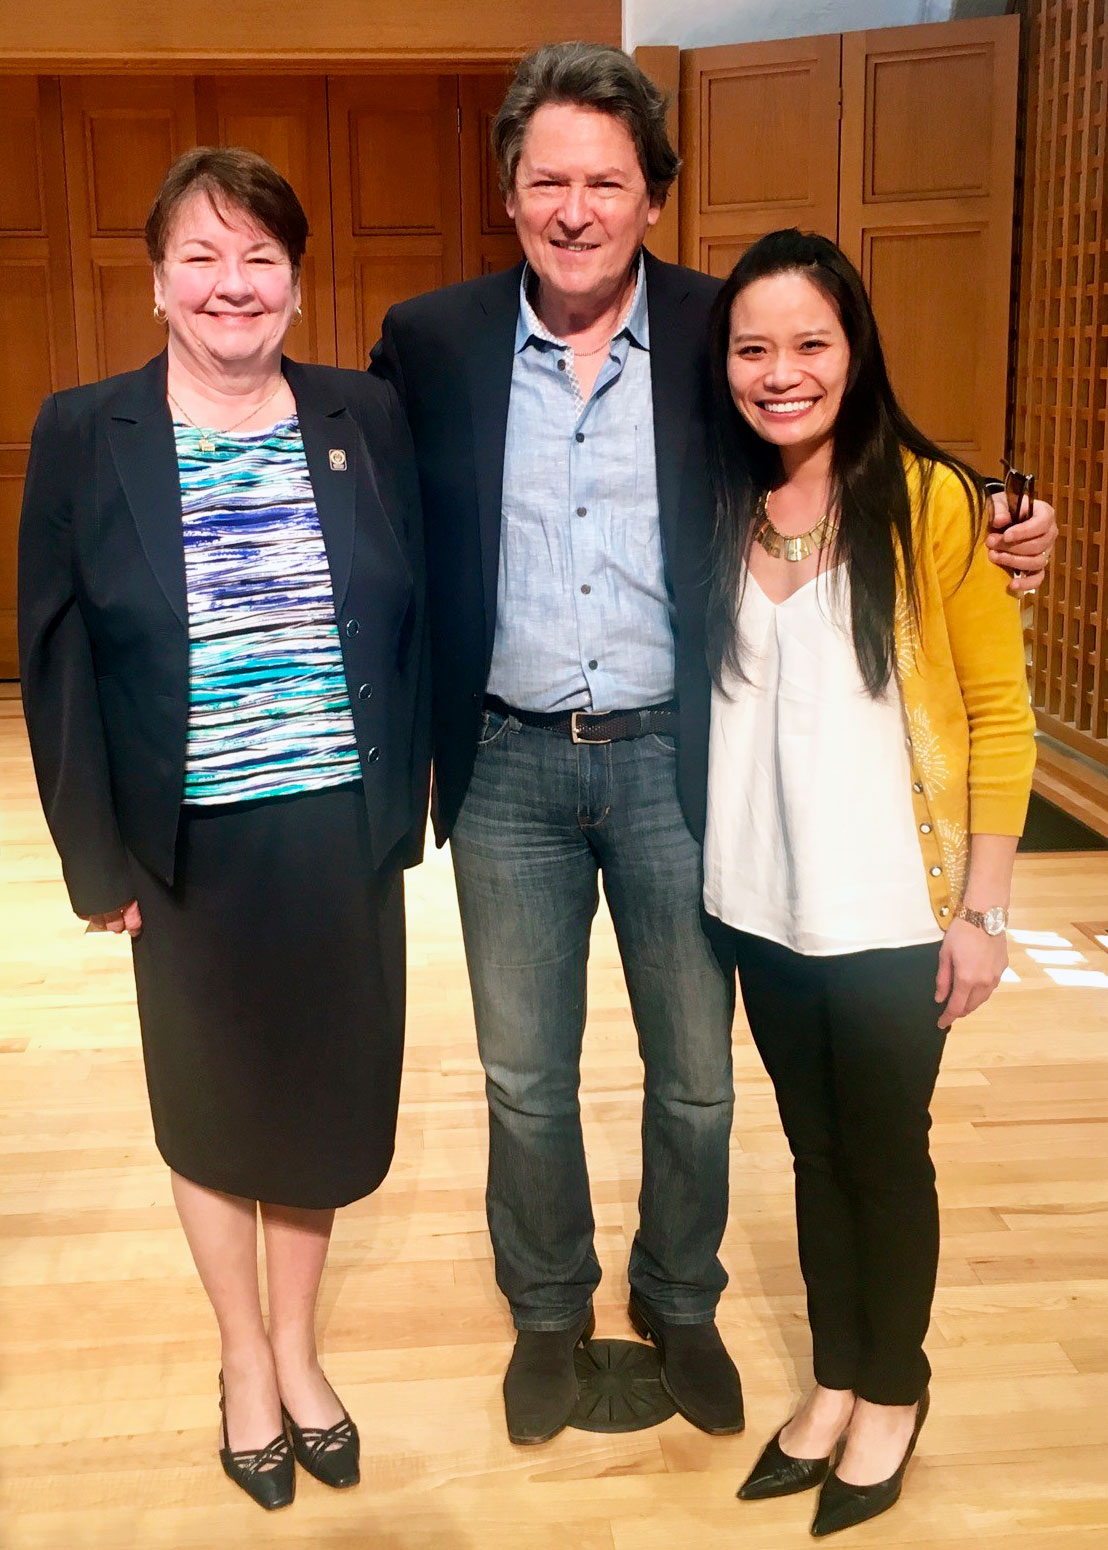 Dr. Peter Simon with Elaine Rusk and Dr. Ruby Wang, from the Pasadena Conservatory of Music